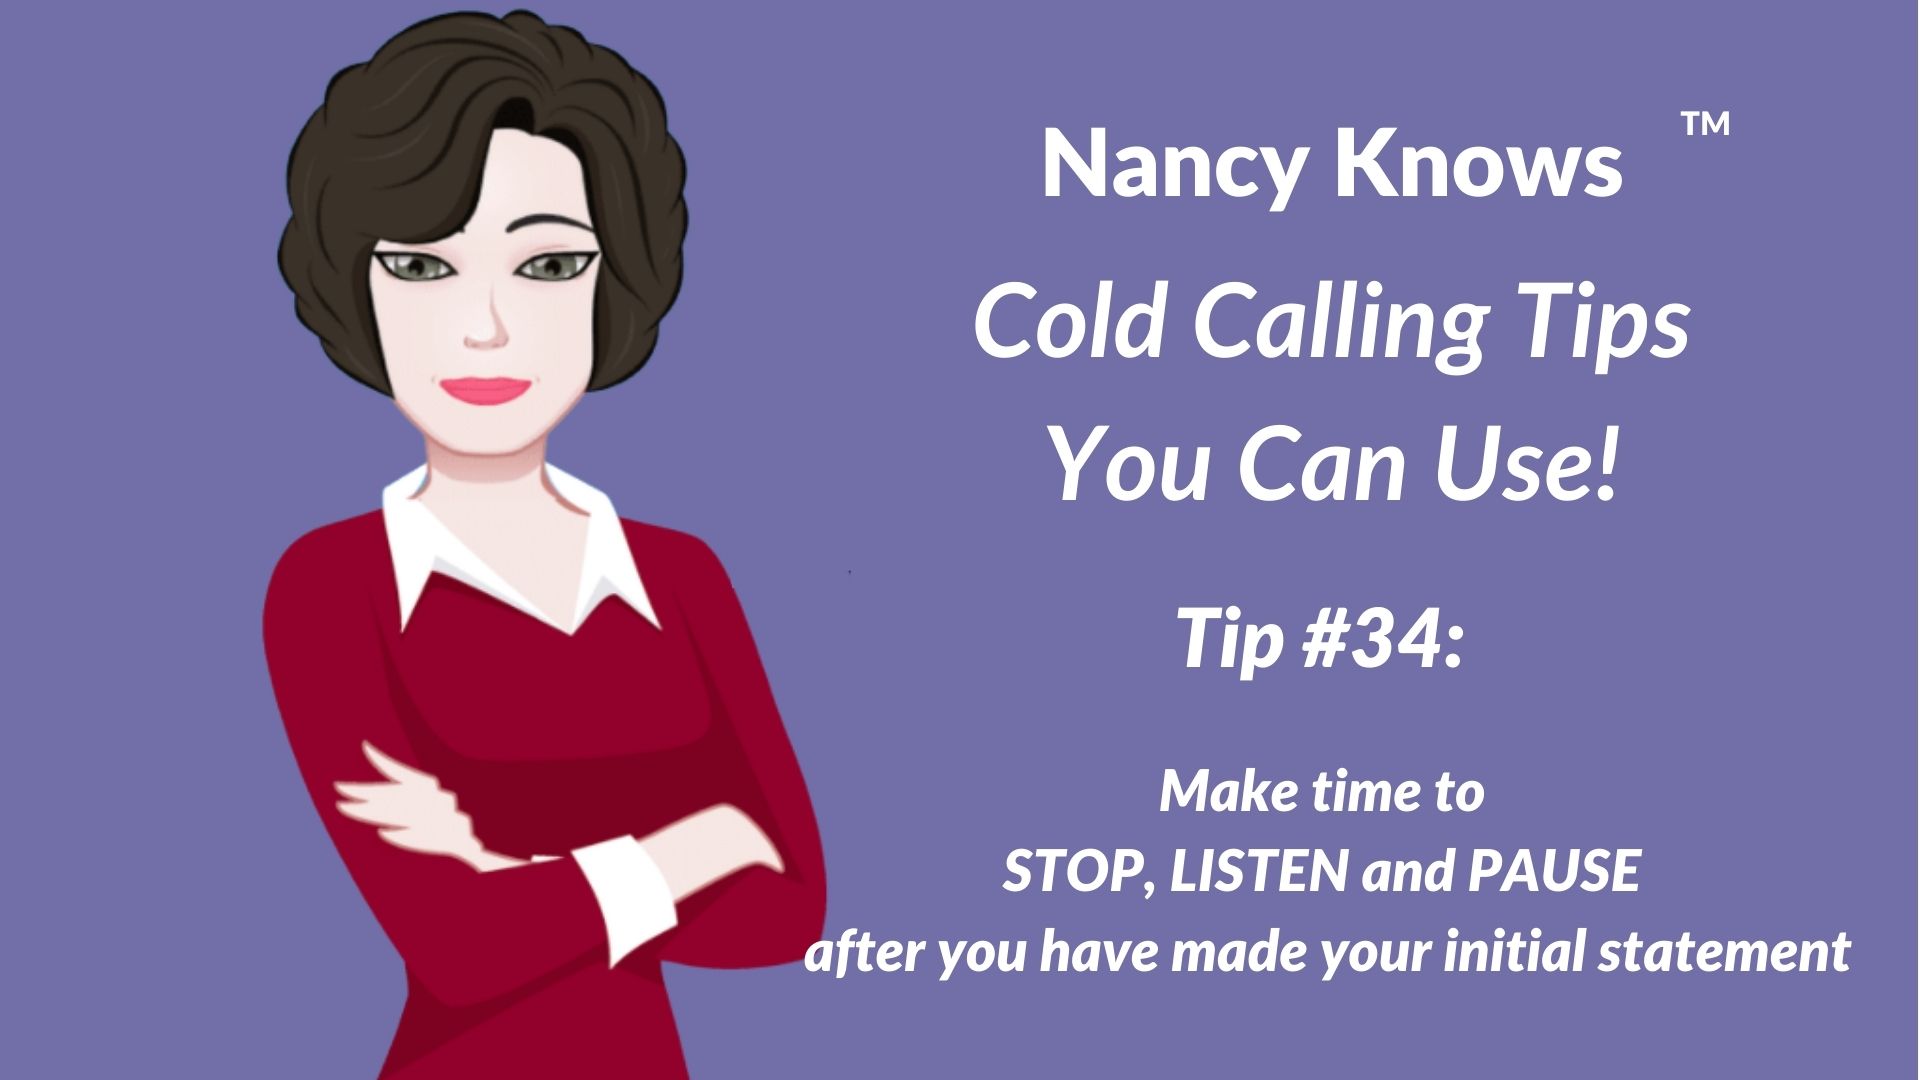 Nancy Knows #34: Make time to STOP, LISTEN and PAUSE after you have made your initial statement